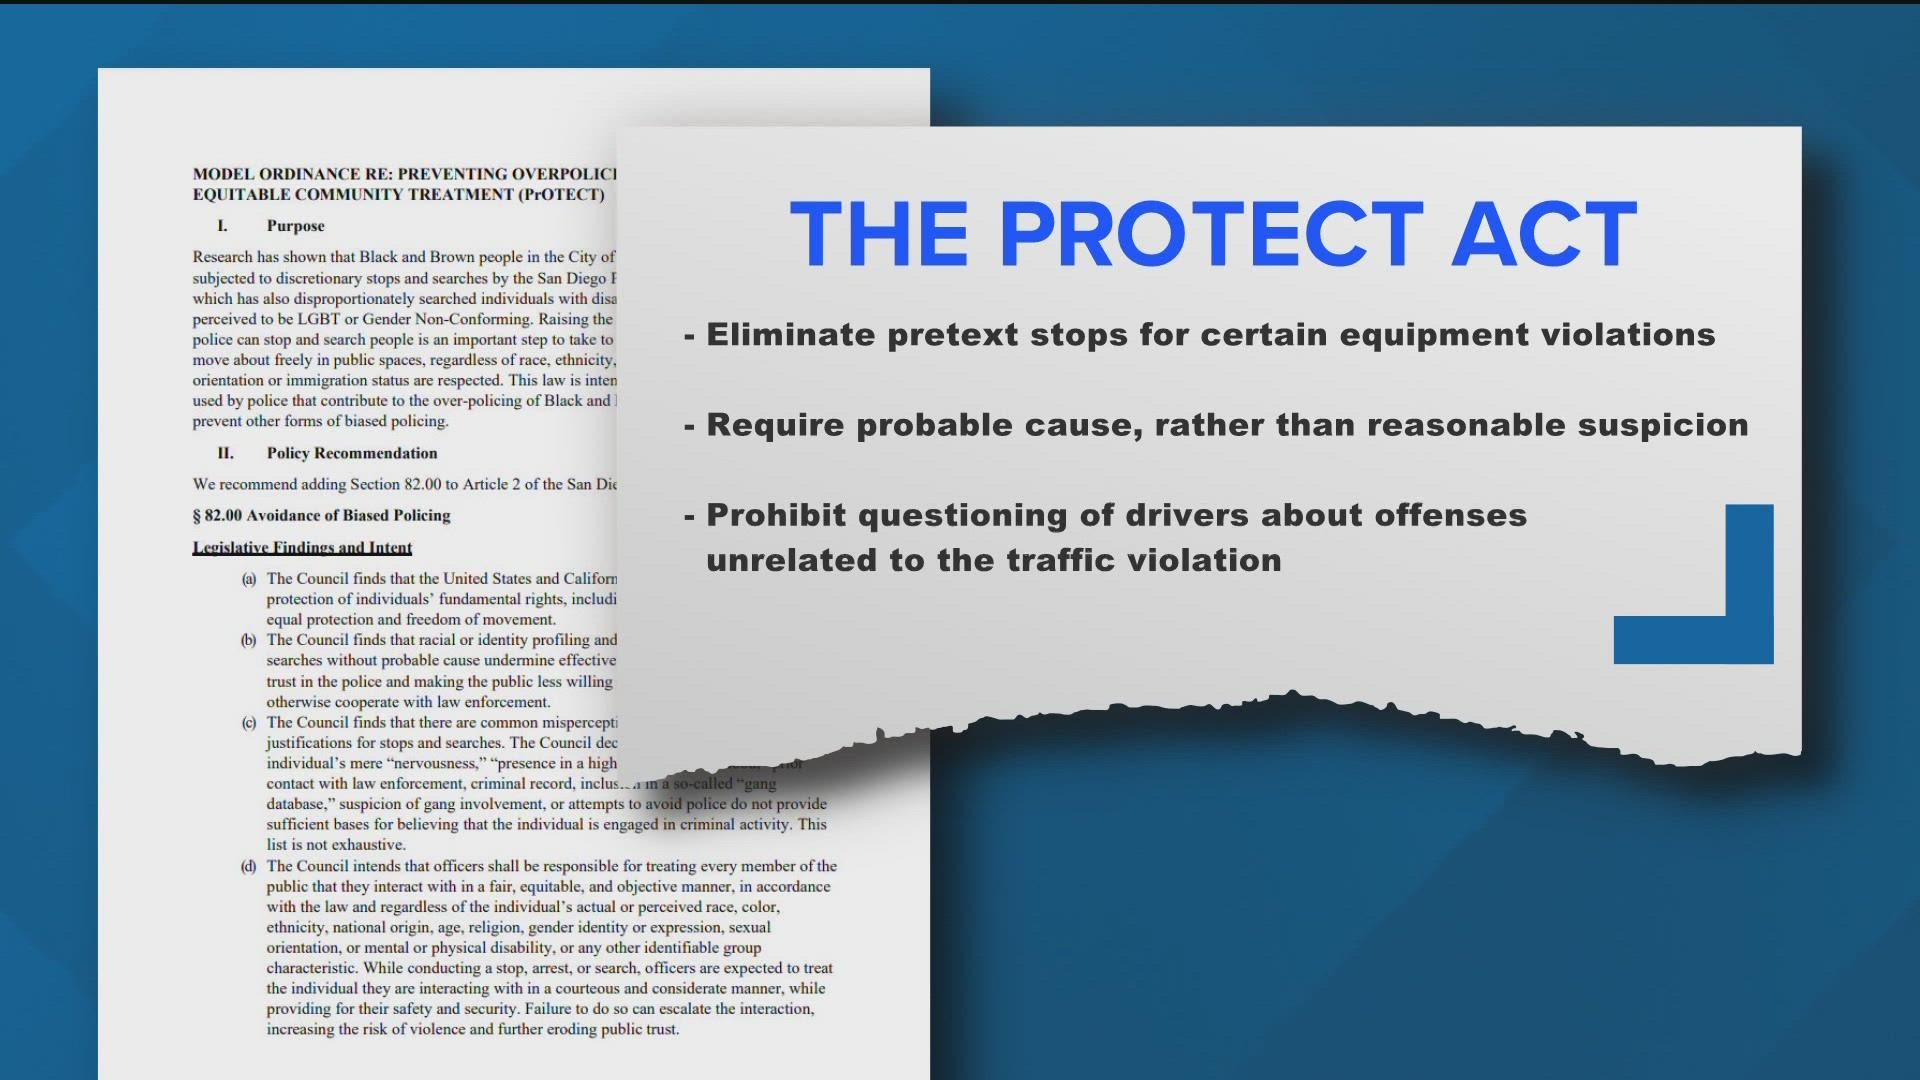 Proposed city ordinance would change the way SDPD conducts traffic stops.